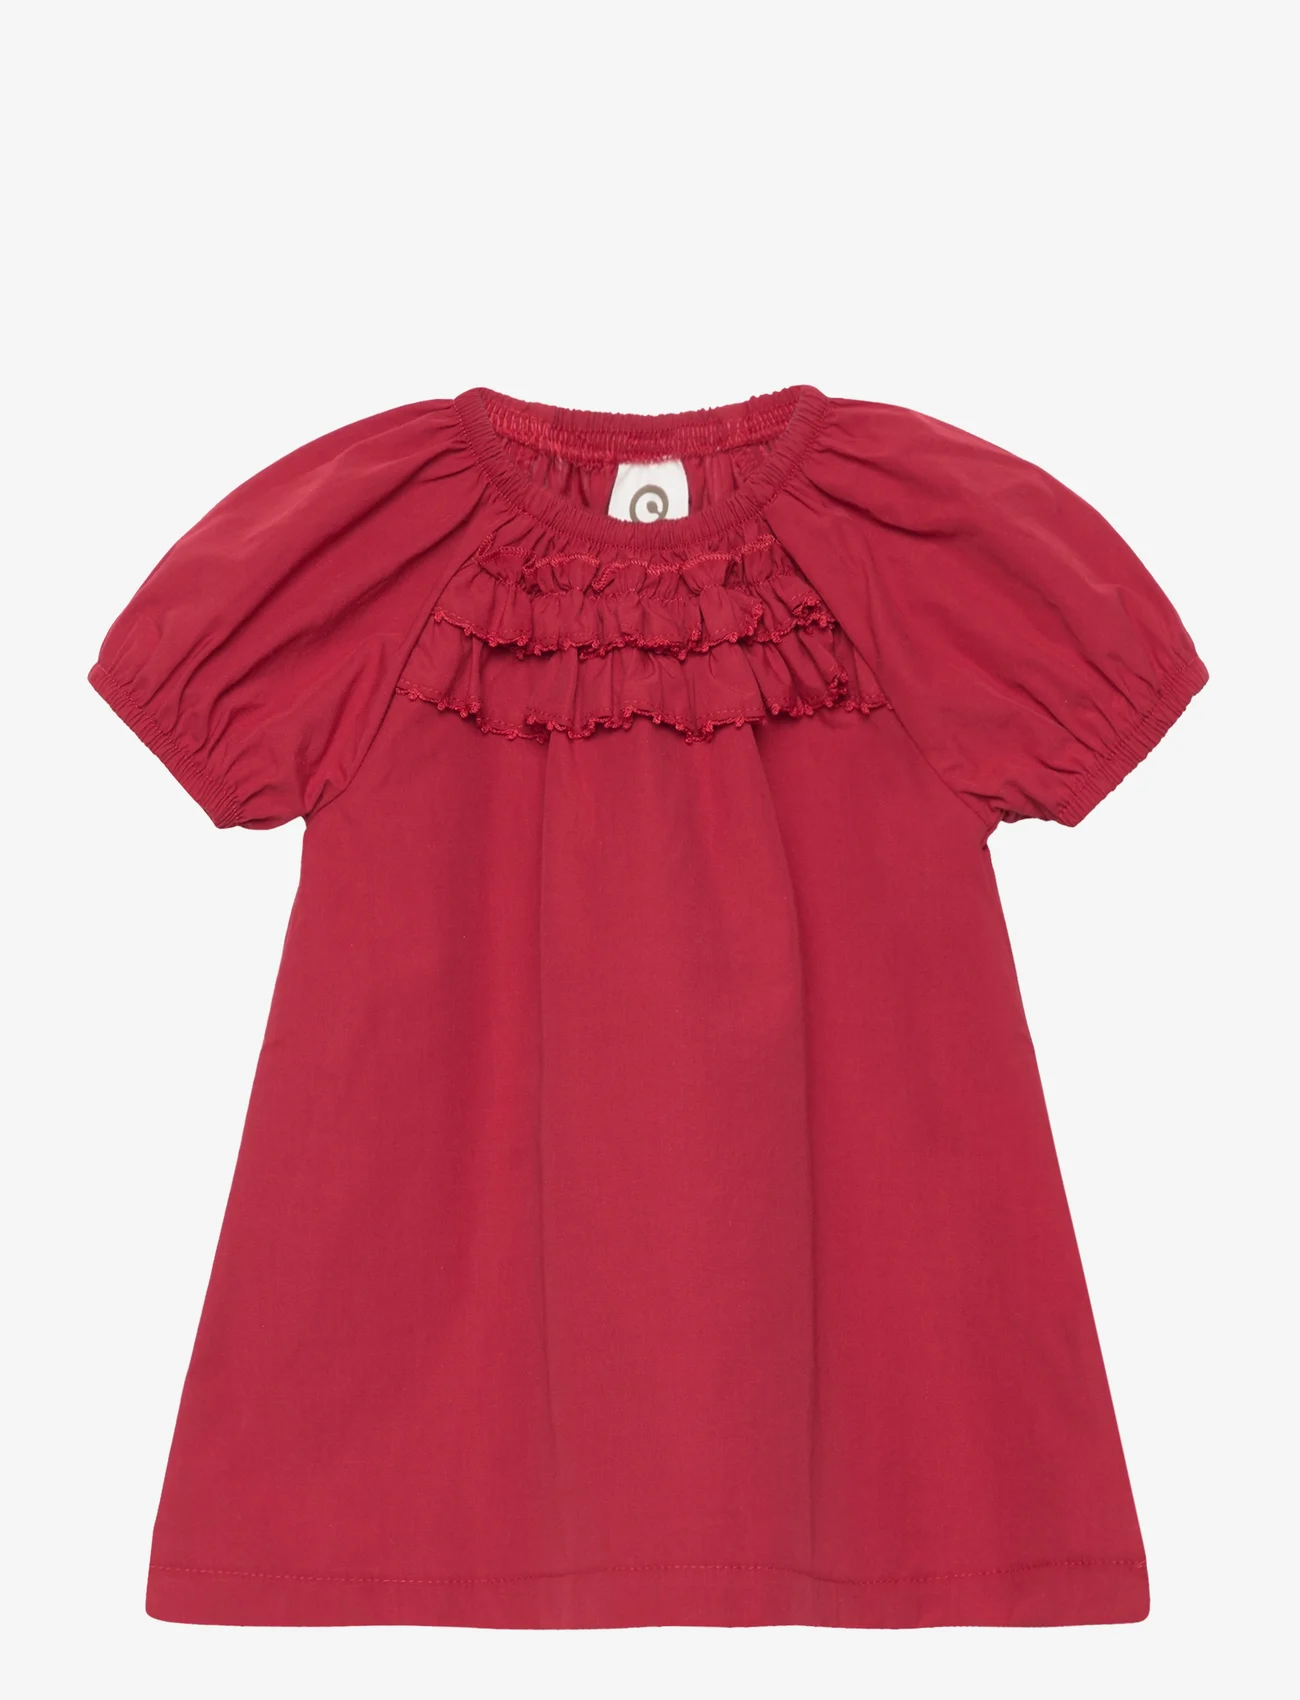 Müsli by Green Cotton - Poplin frill s/s dress baby - short-sleeved baby dresses - berry red - 0